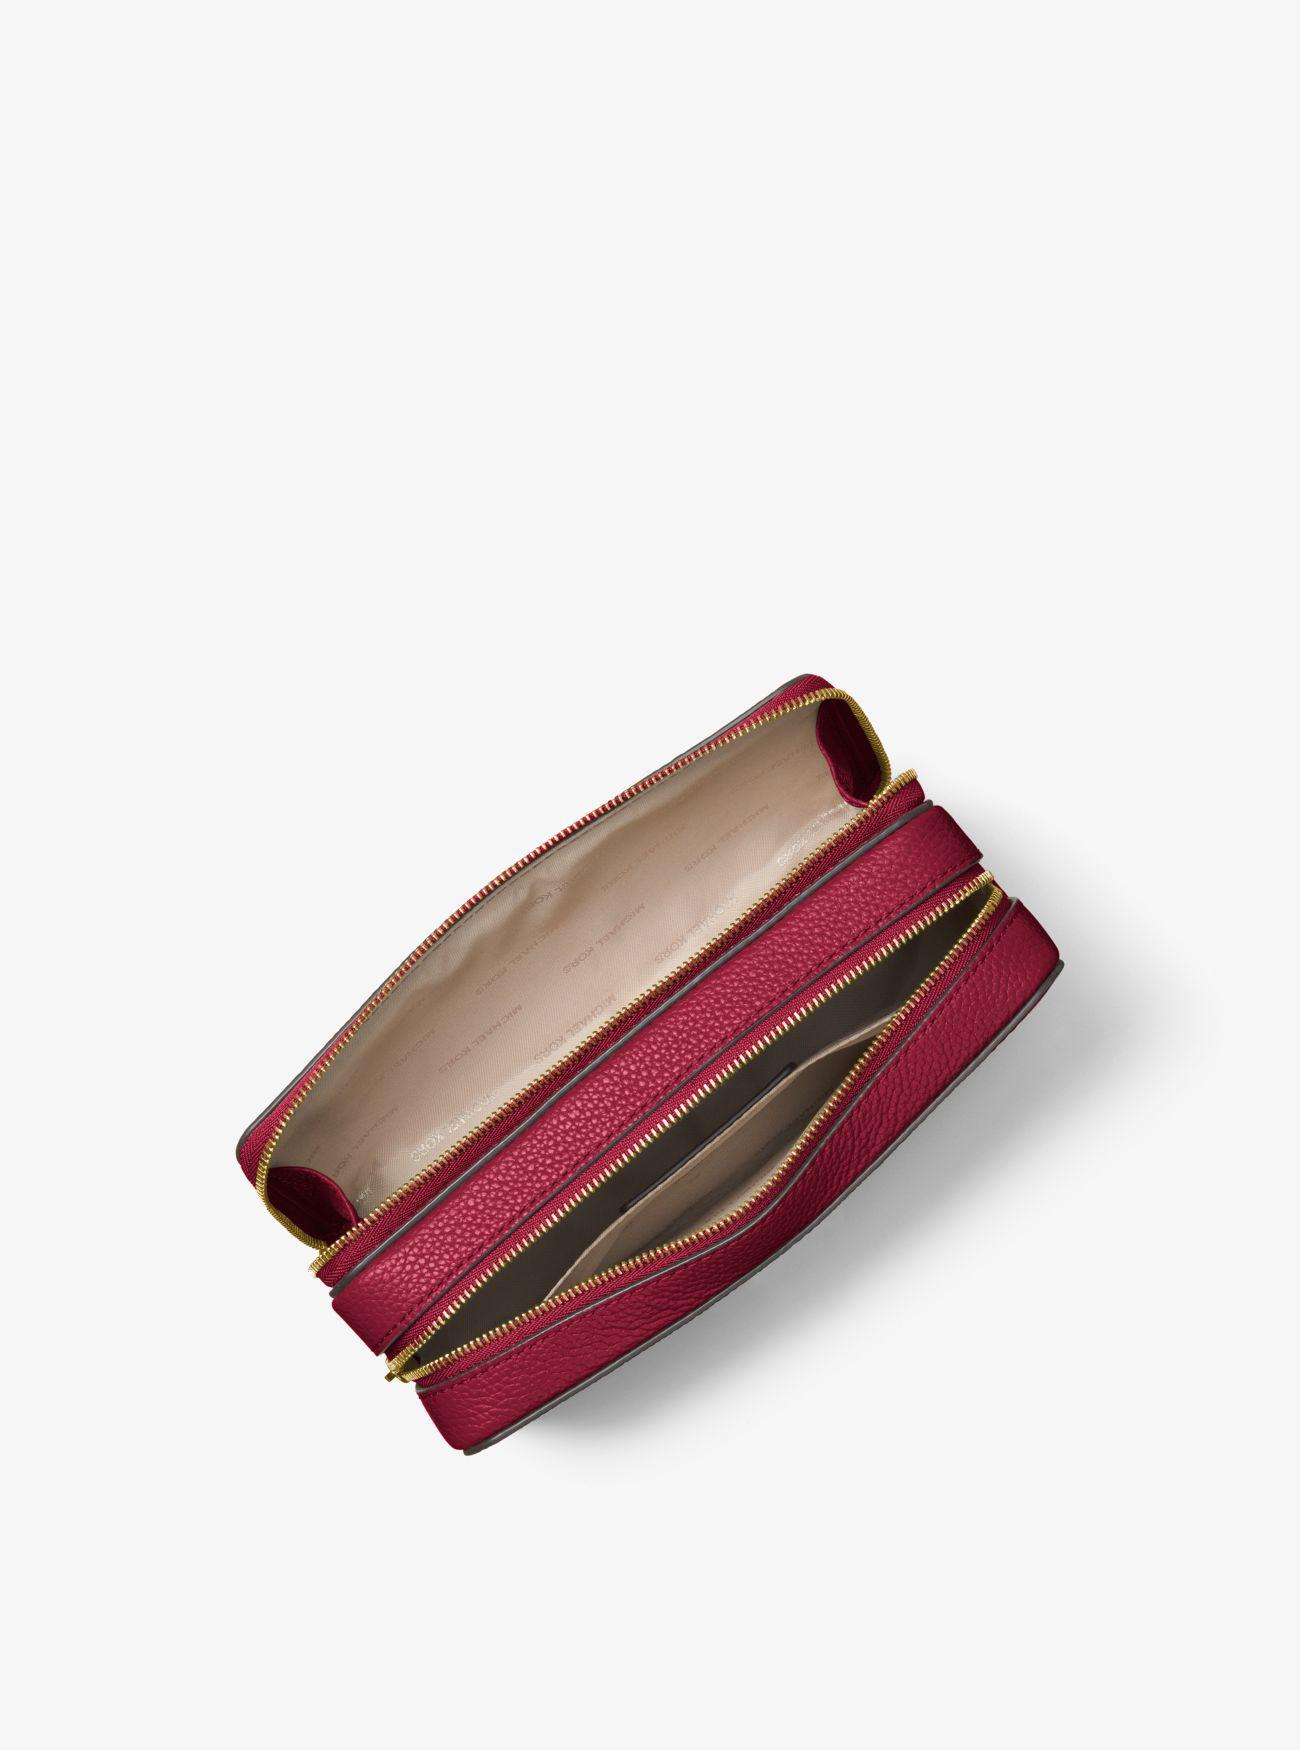 Michael Kors Jet Set Travel Leather Cosmetic Pouch in Cherry (Red) - Lyst